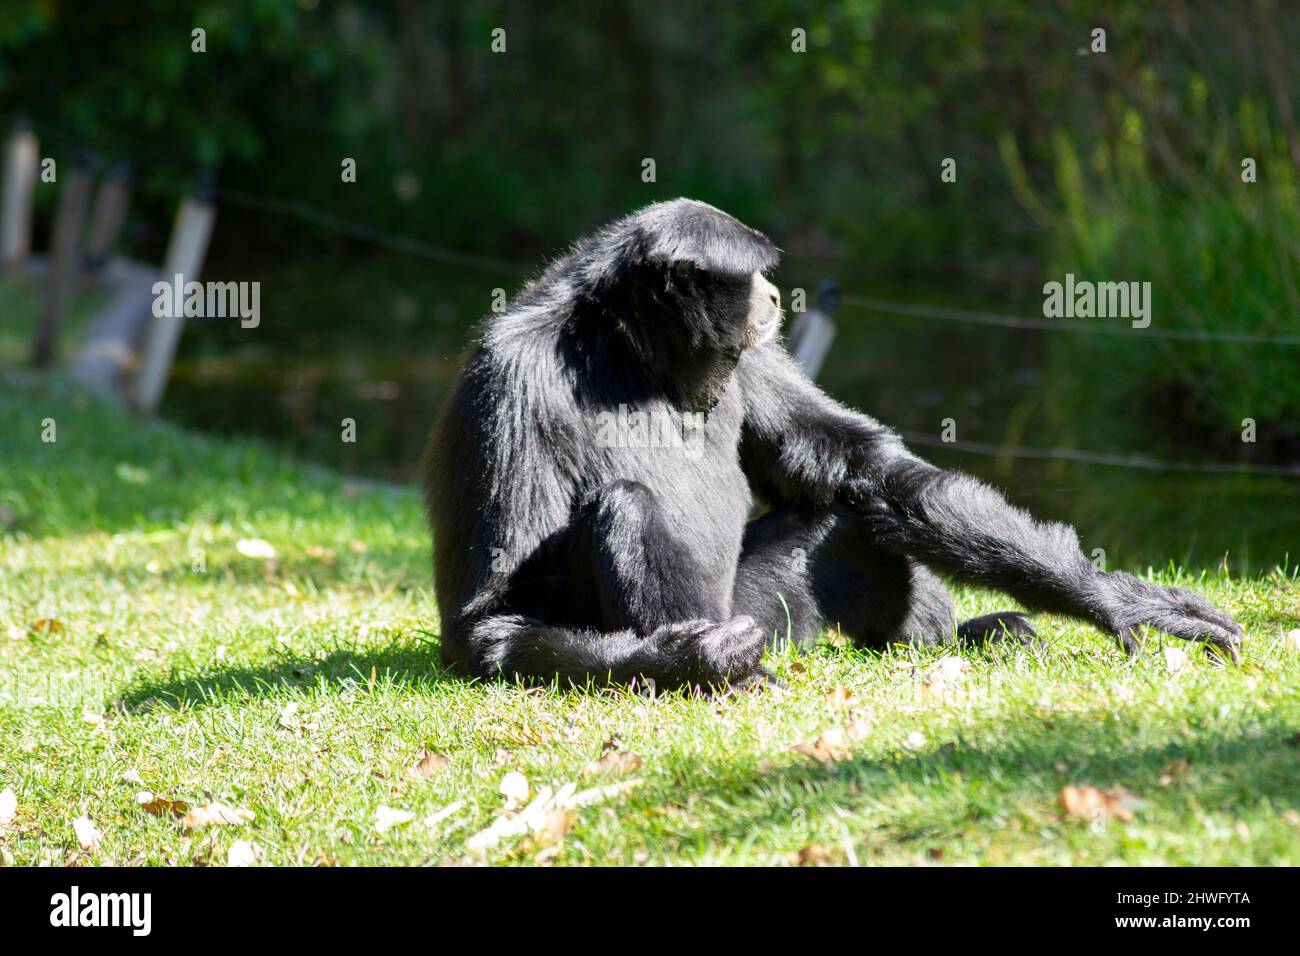 The siamang (Symphalangus syndactylus) is an arboreal, black-furred gibbon native to the forests of Indonesia, Malaysia, and Thailand. Stock Photo